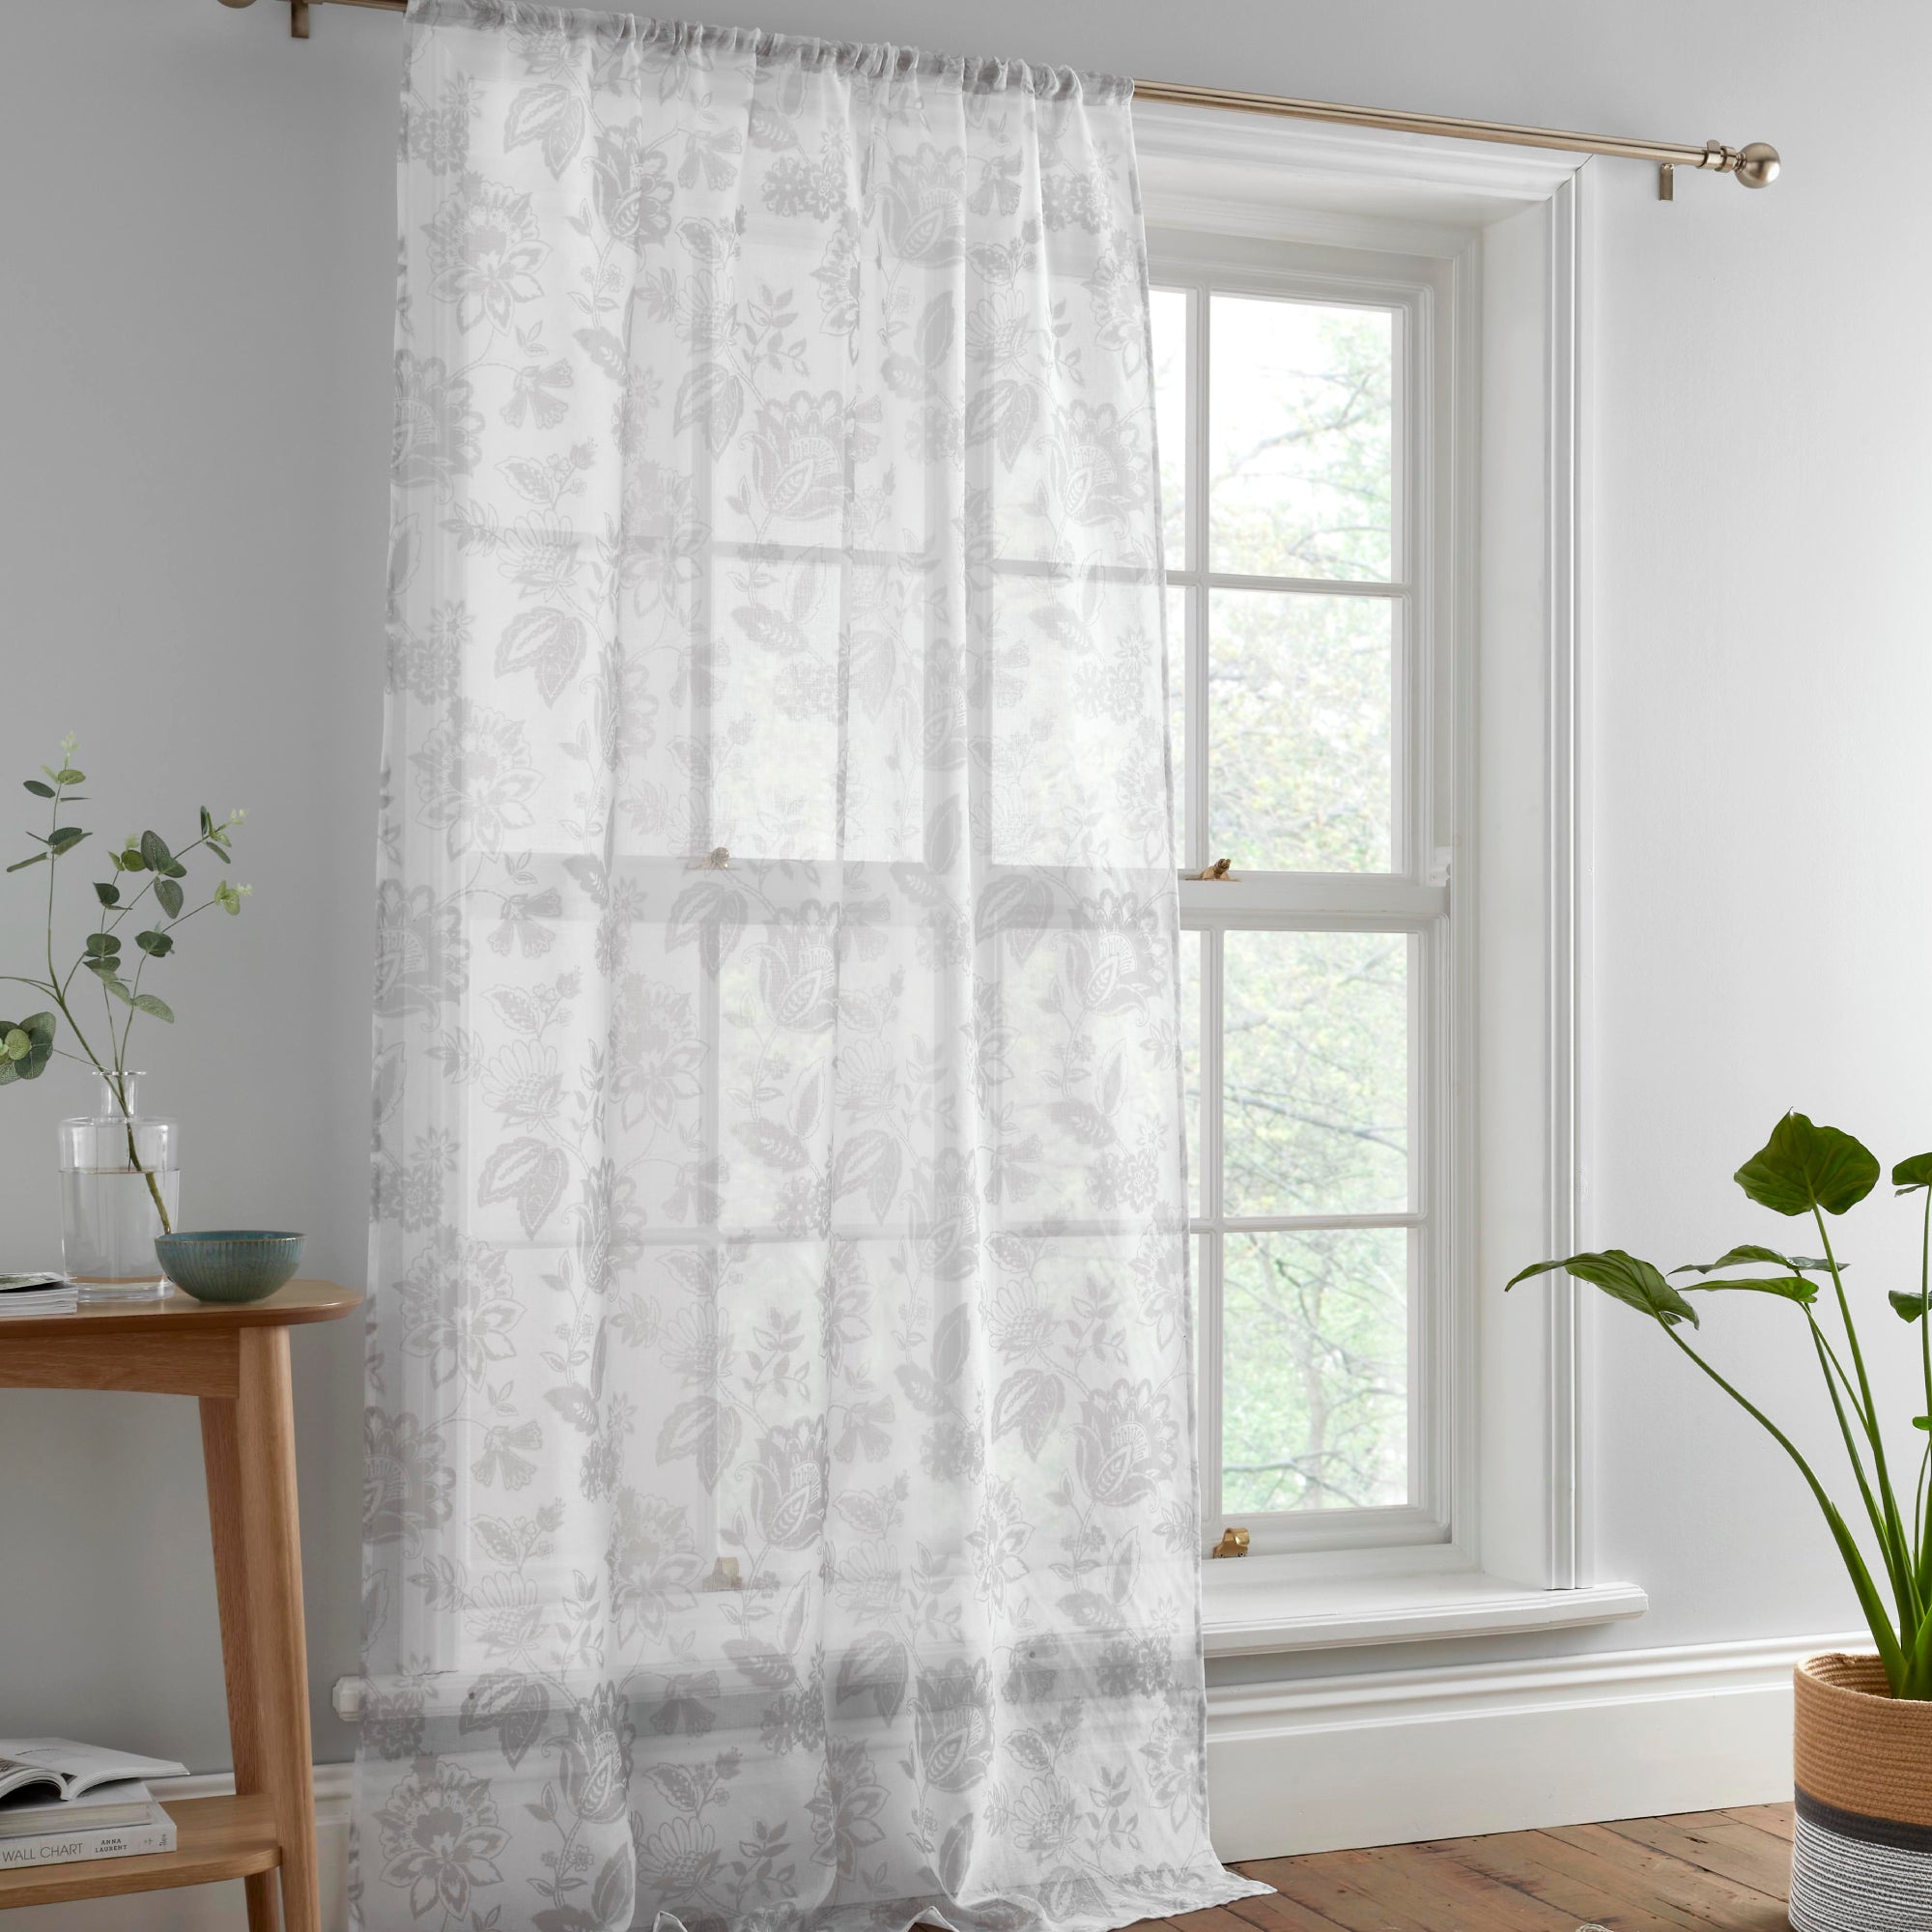 Voile Panel Marinelli by Dreams & Drapes Curtains in Grey